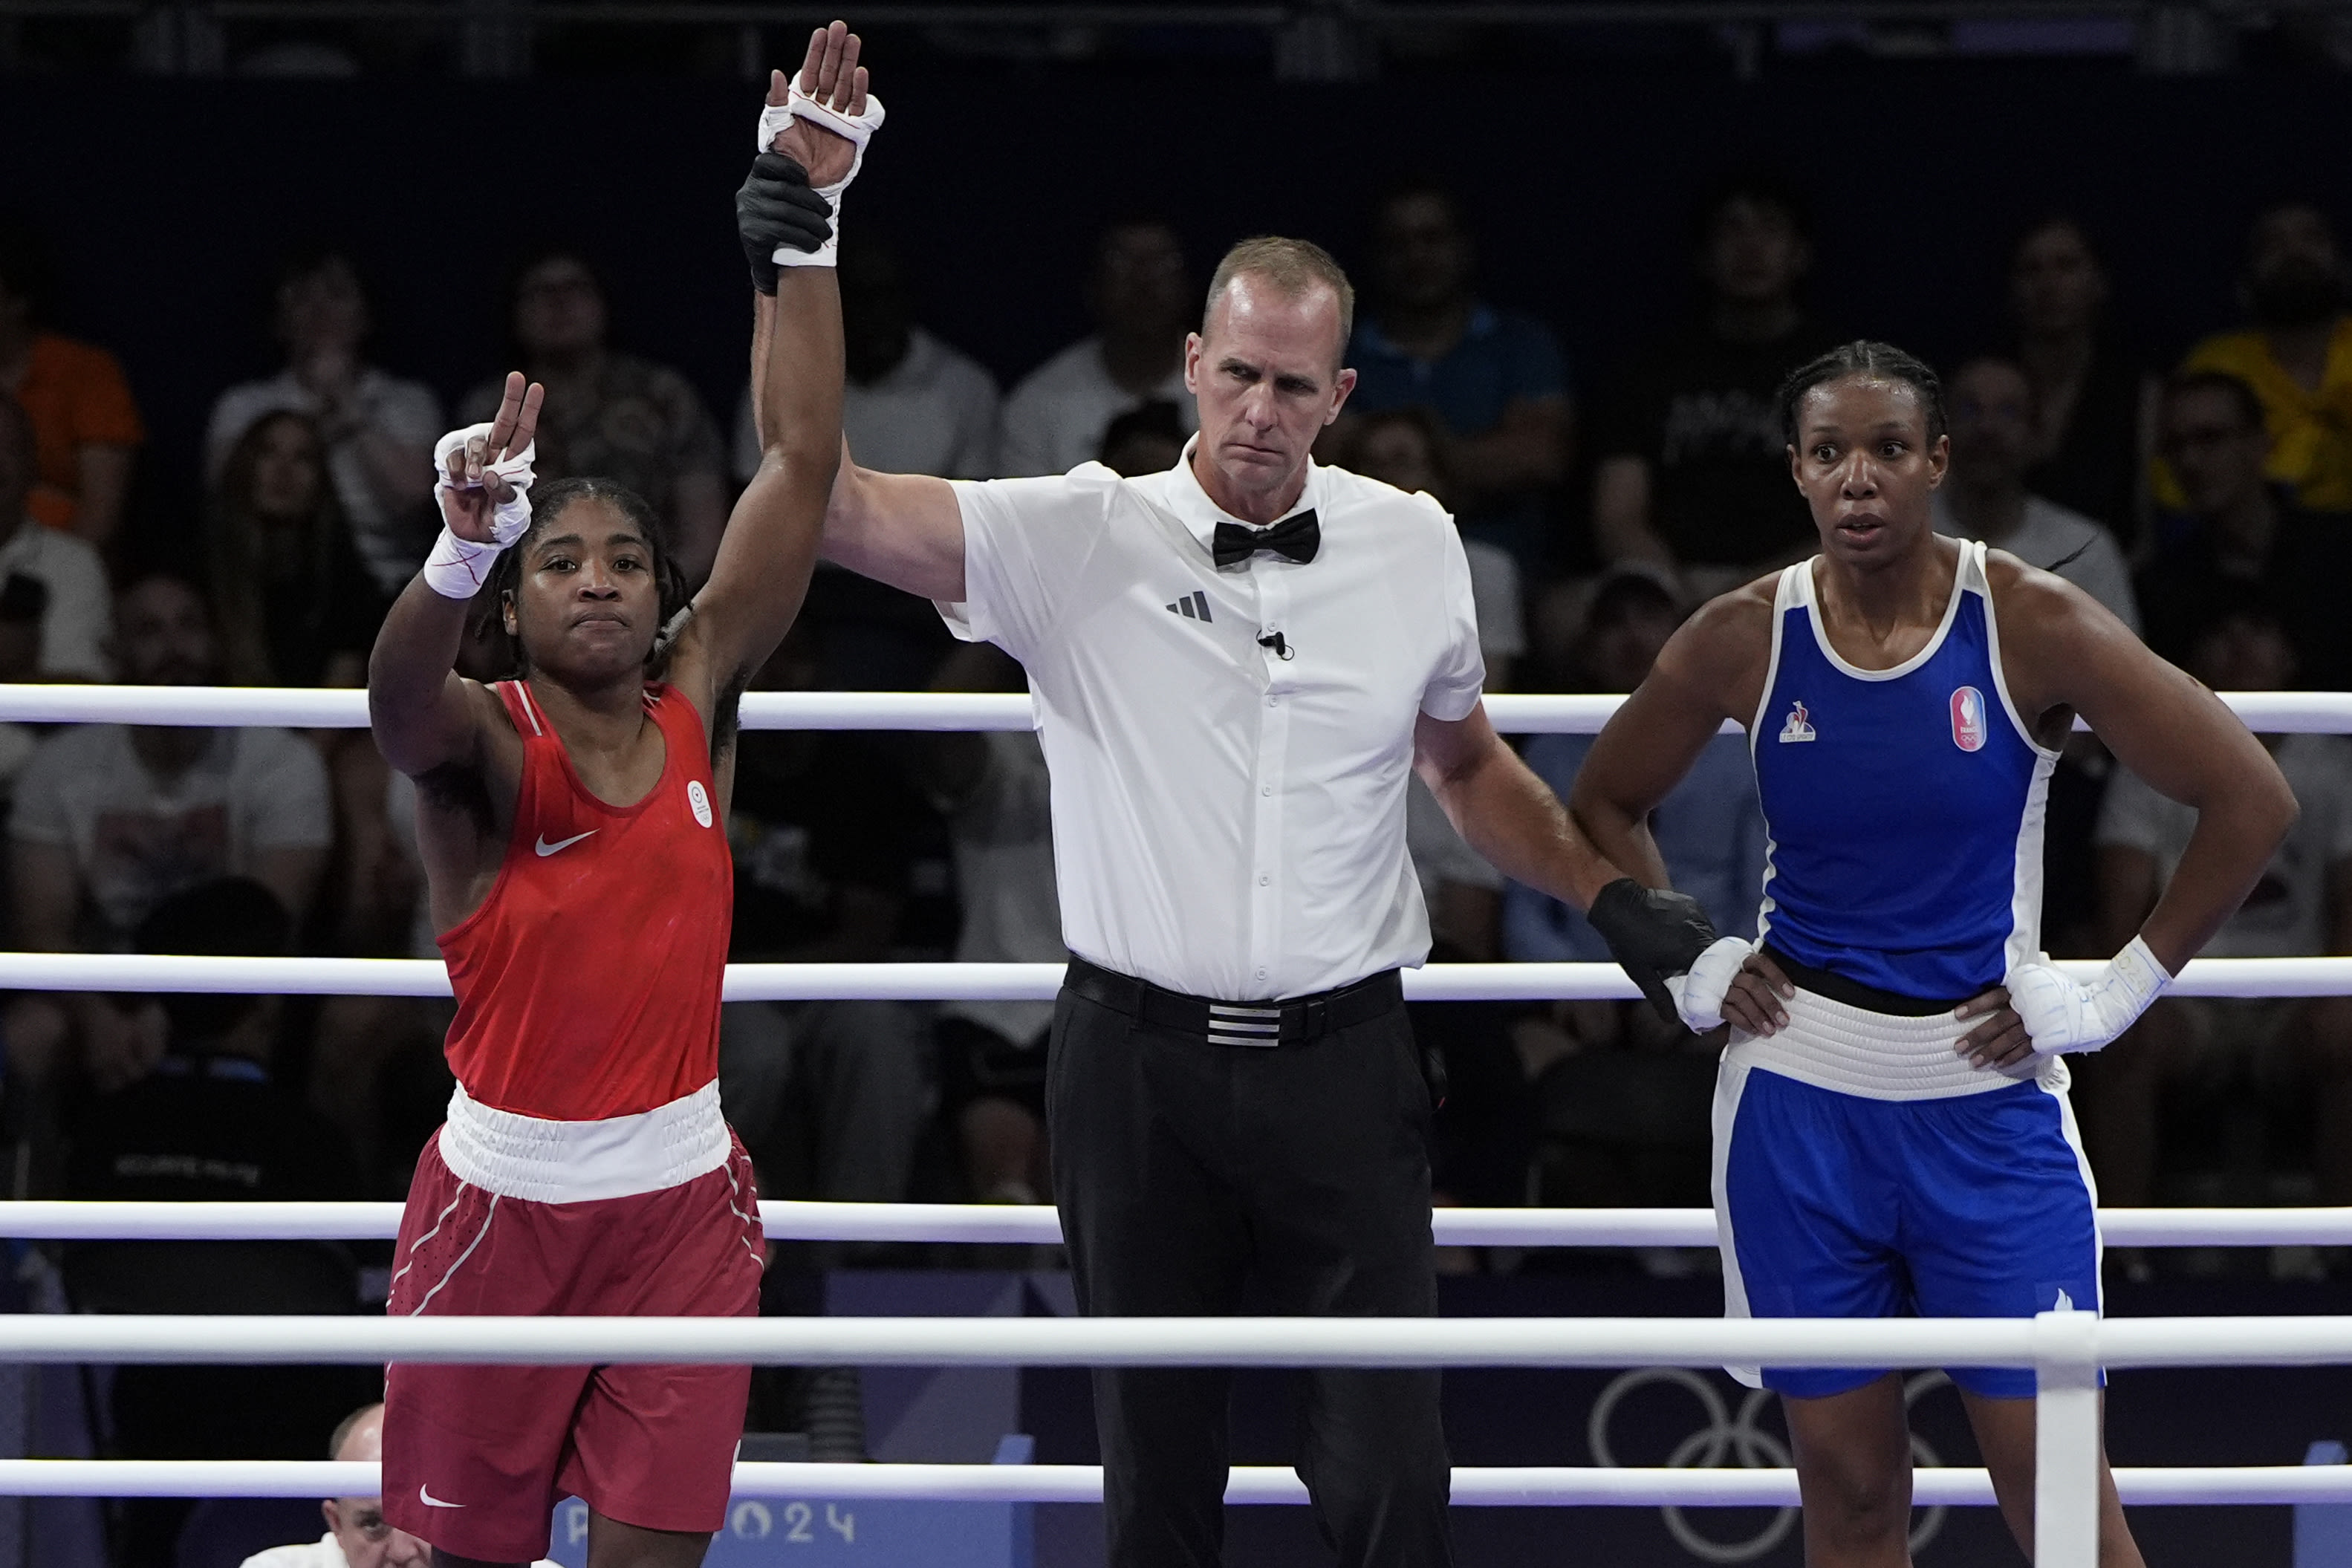 Boxer Cindy Ngamba is the refugee team's first athlete to clinch a medal at the Paris Olympics